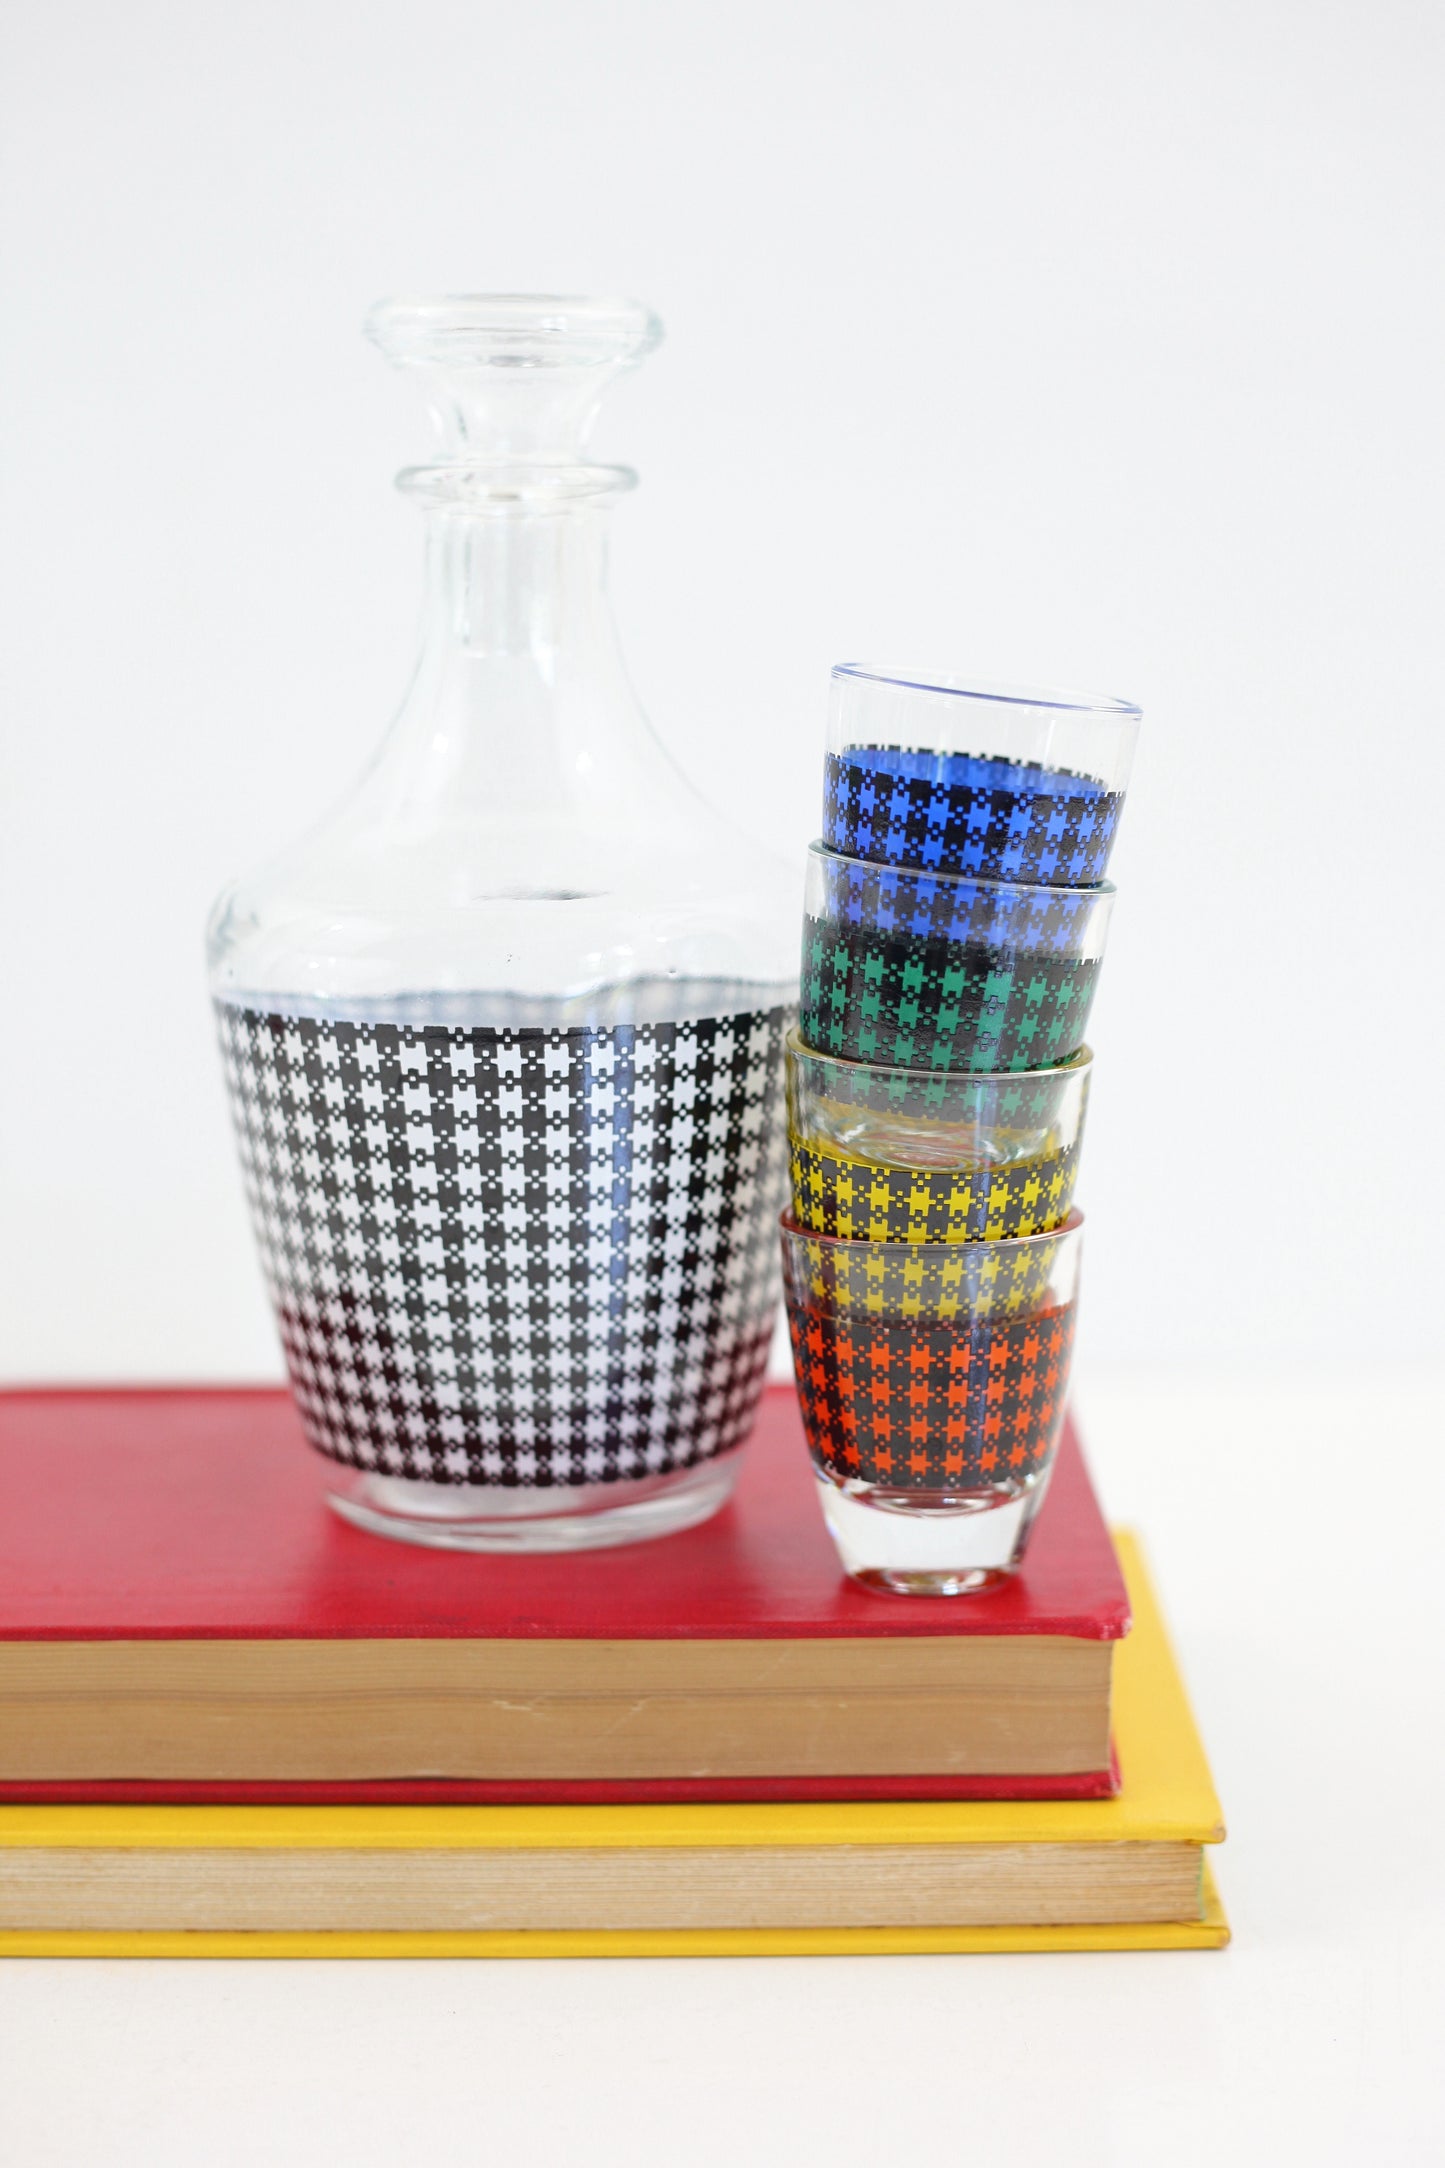 SOLD - Mid Century Houndstooth Shot Glasses & Decanter Set from France